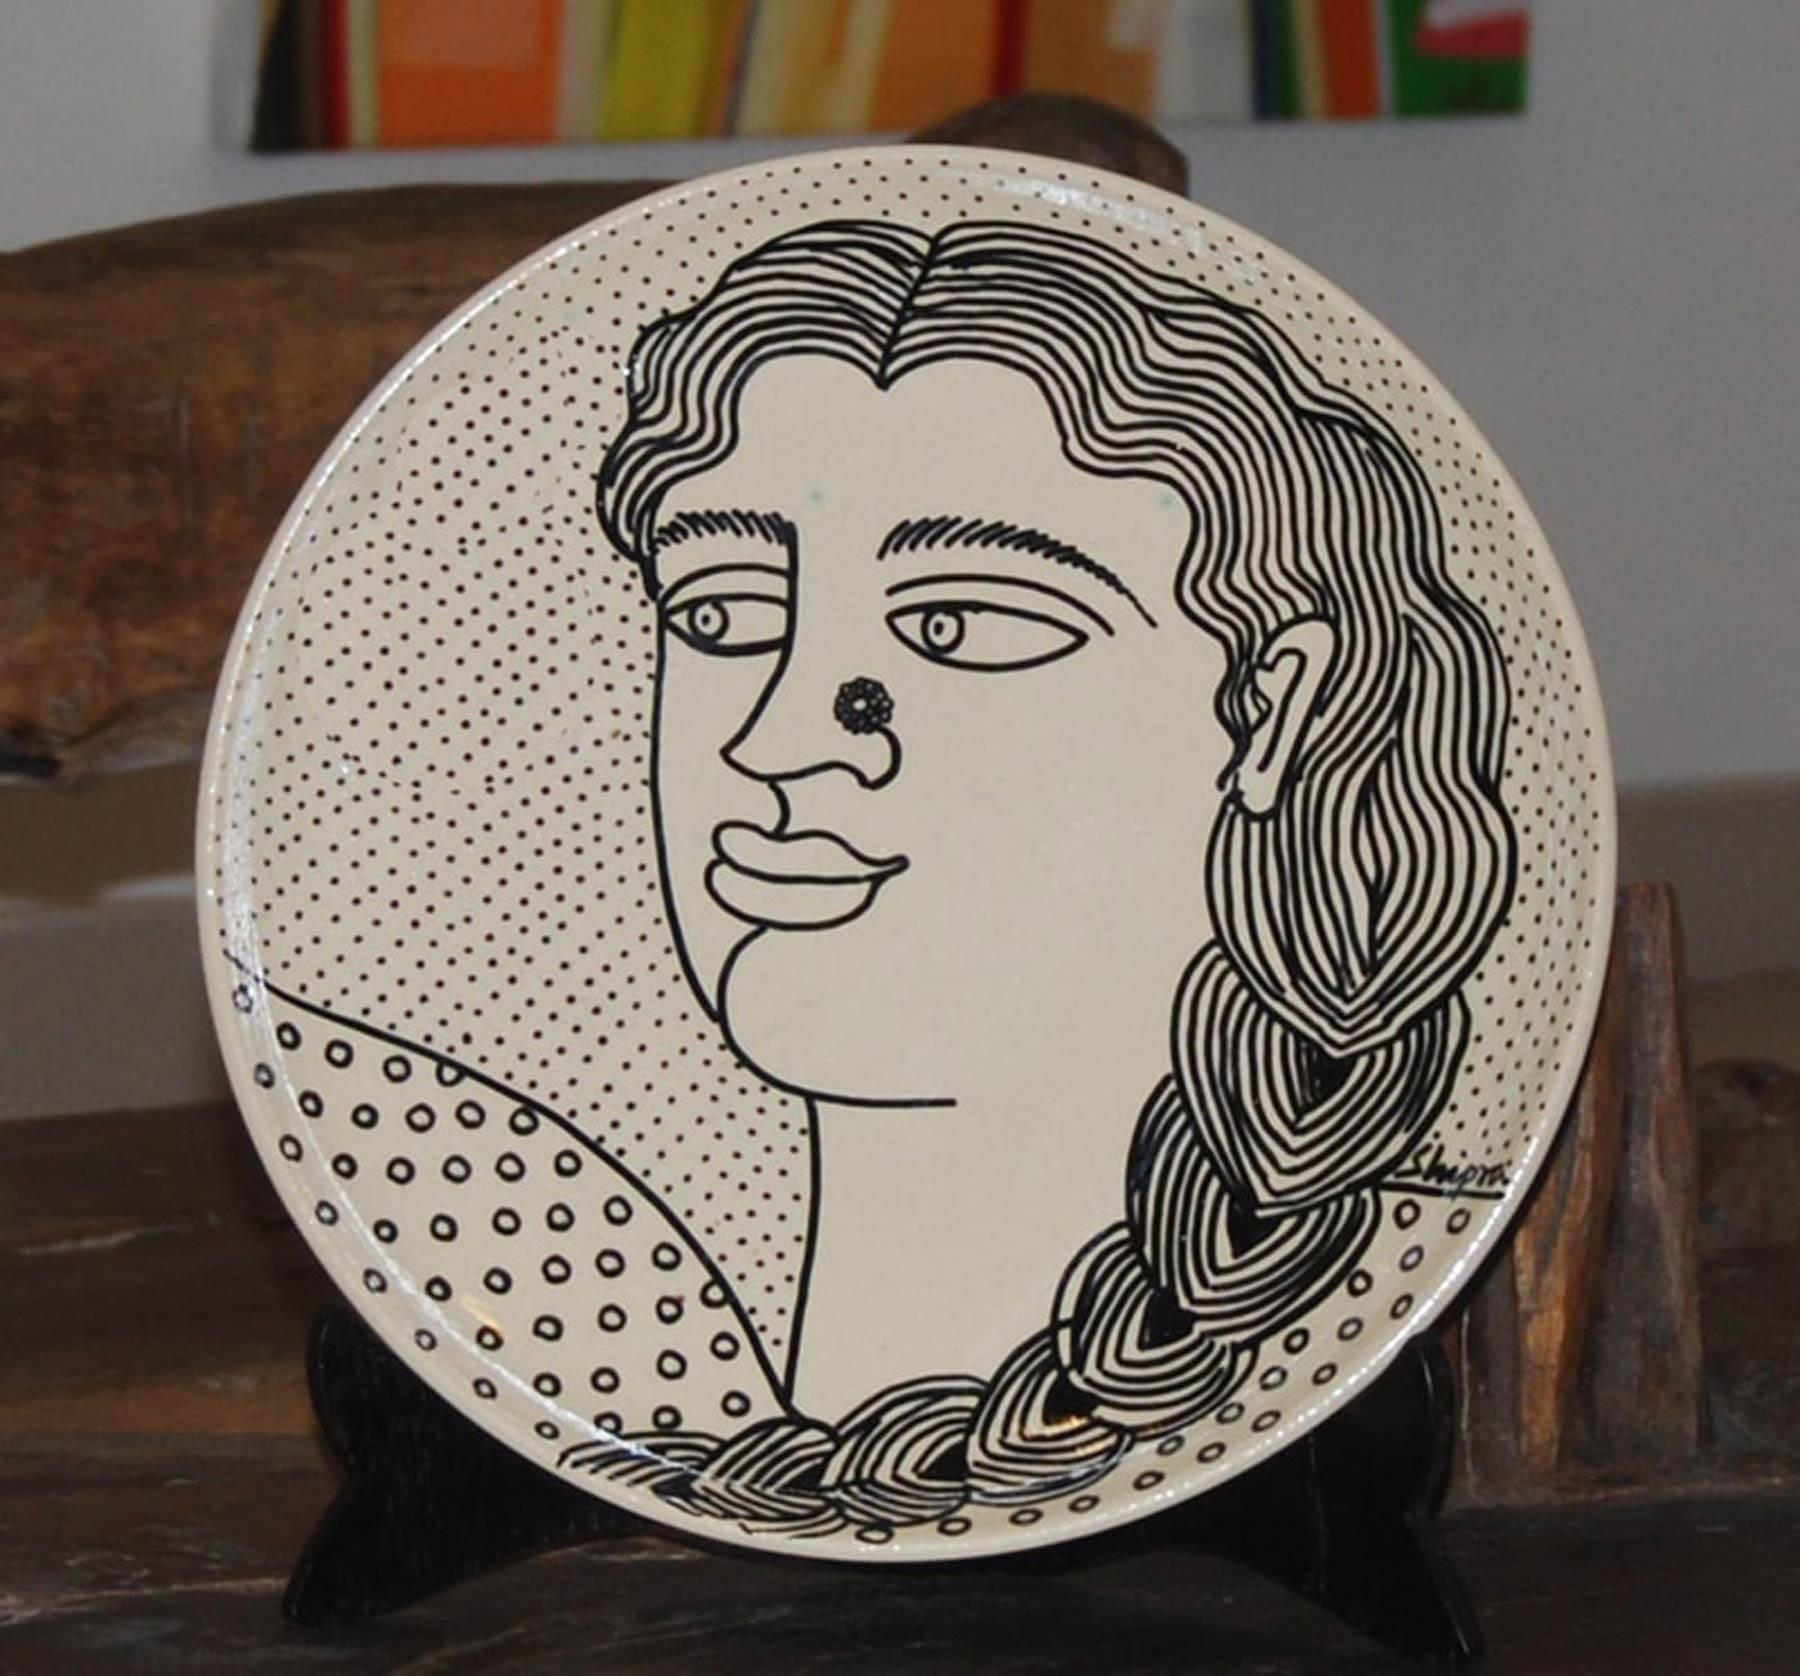 Shipra Bhattacharya Portrait Painting - Portrait of an Indian Woman, Ink on Ceramic Plate by Indian Artist "In Stock"